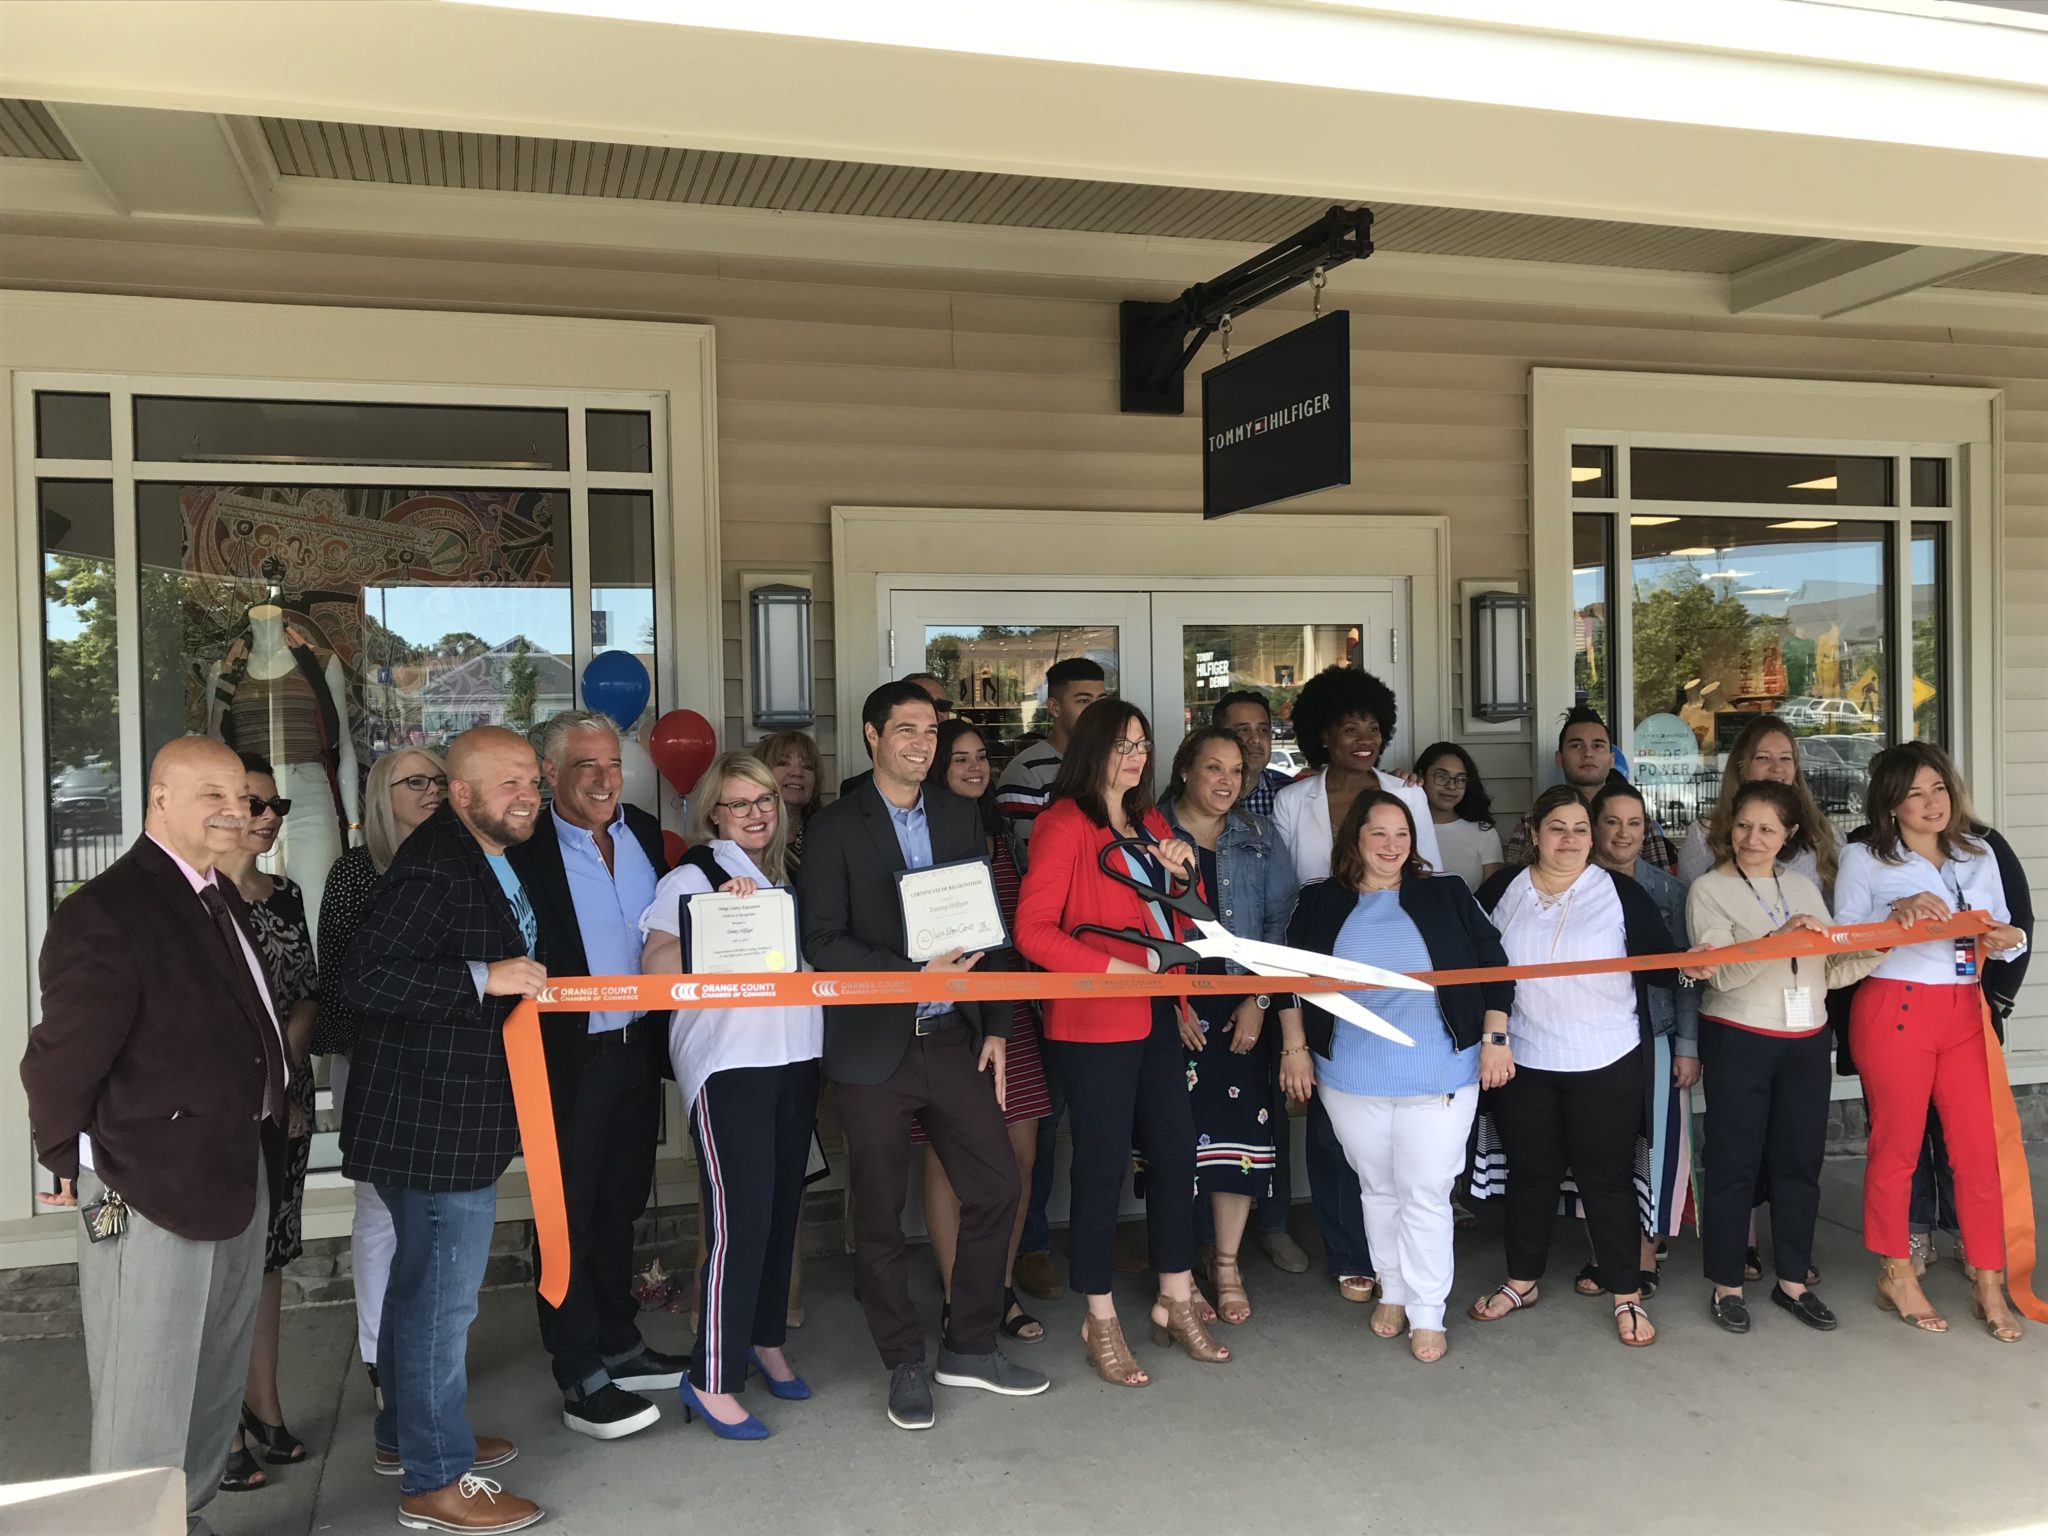 Tommy Hilfiger Store Celebrates Grand Reopening at Woodbury Common